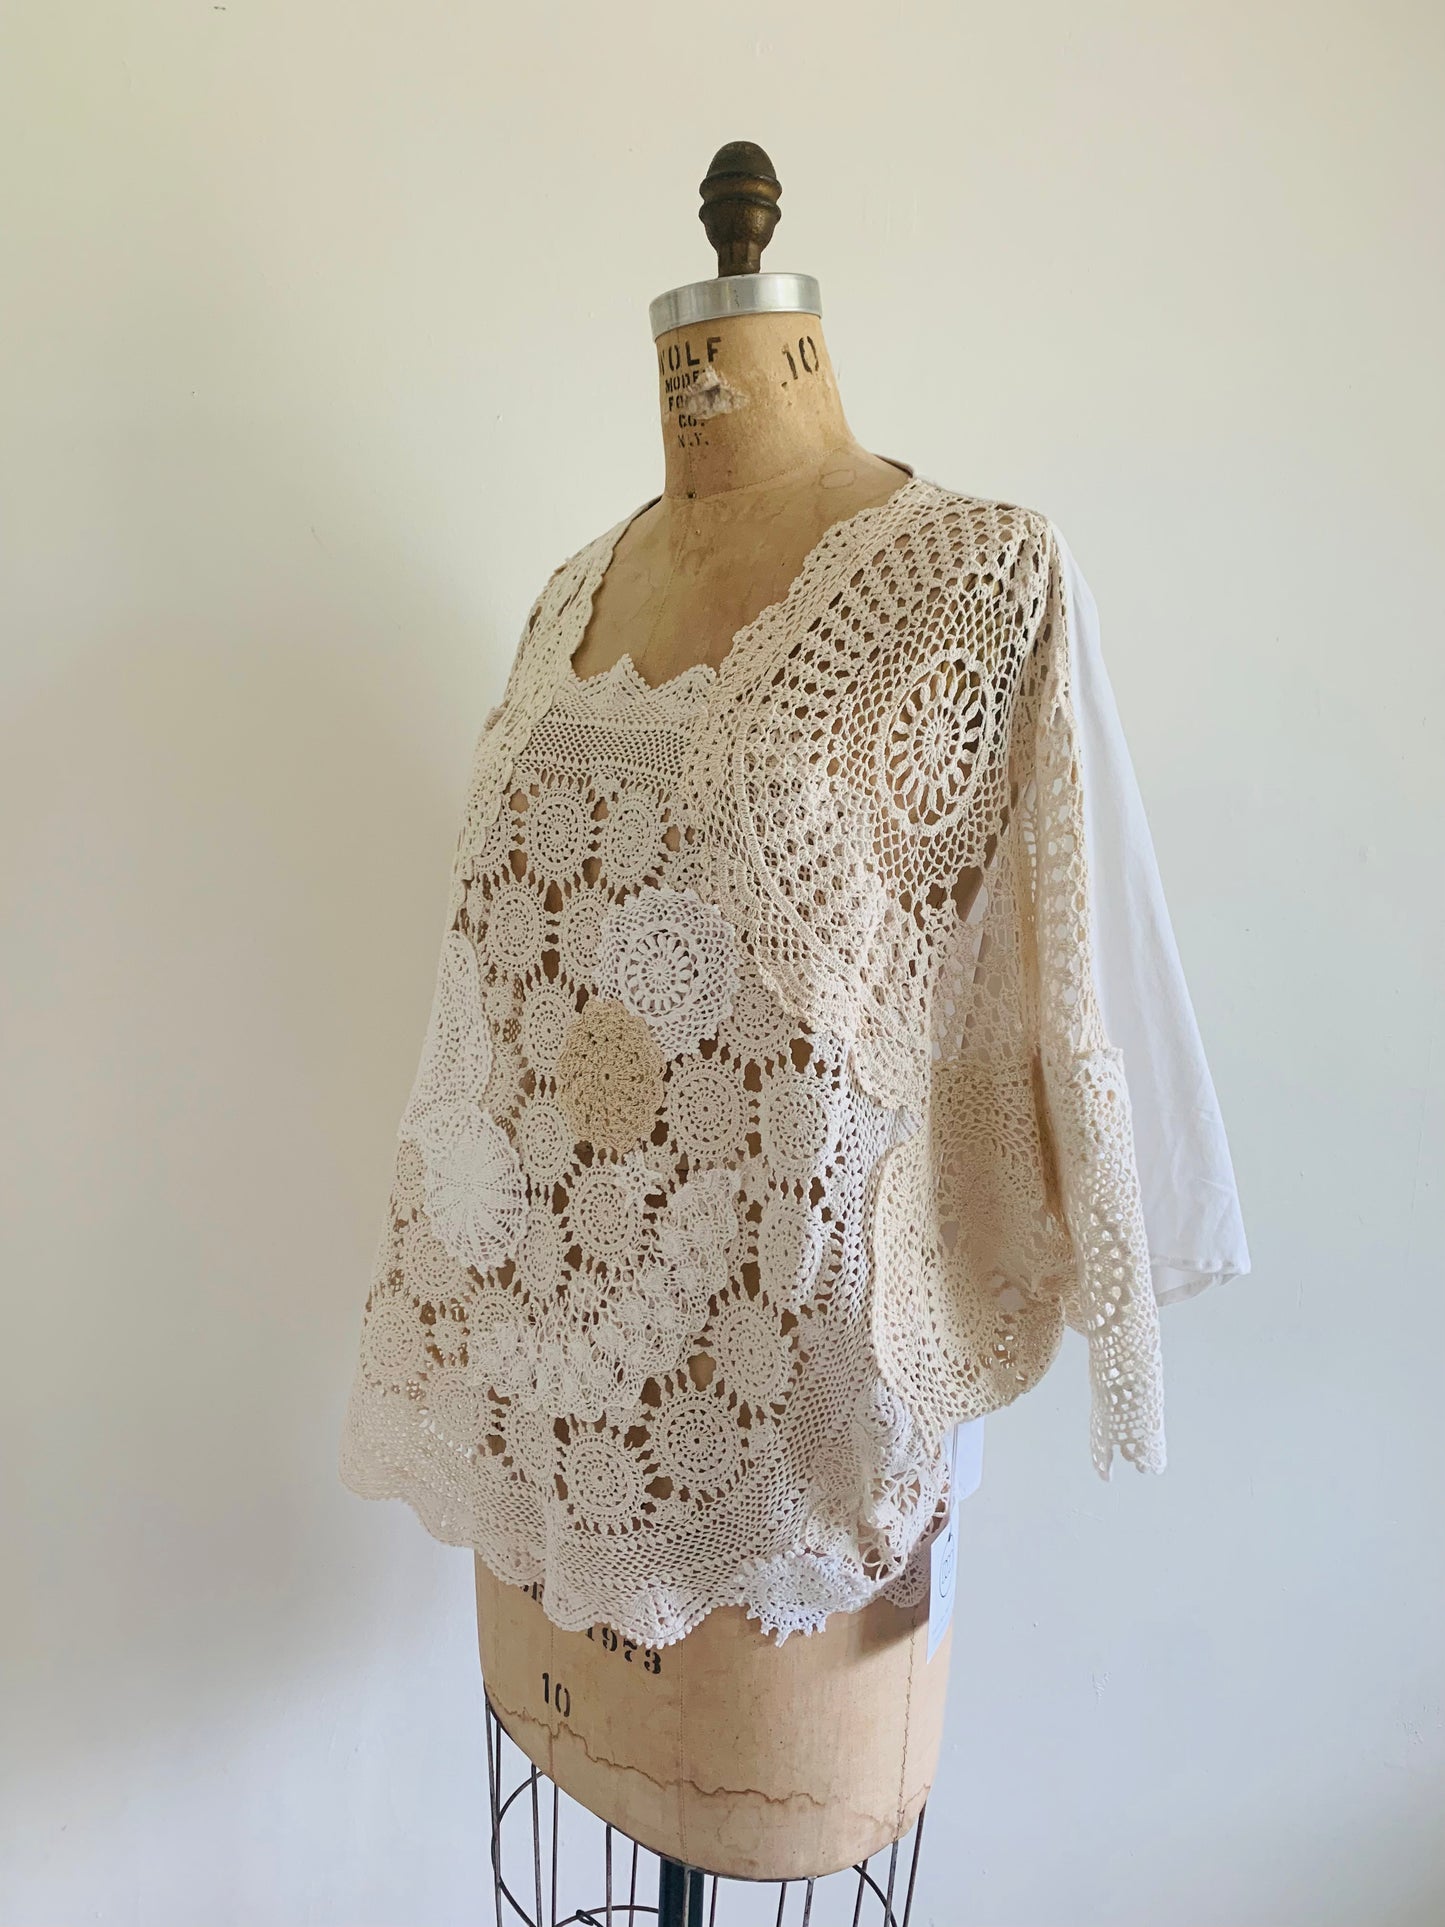 Vintage Crocheted Doily Square Necked Kym Top Size up to 2X #KYMC10